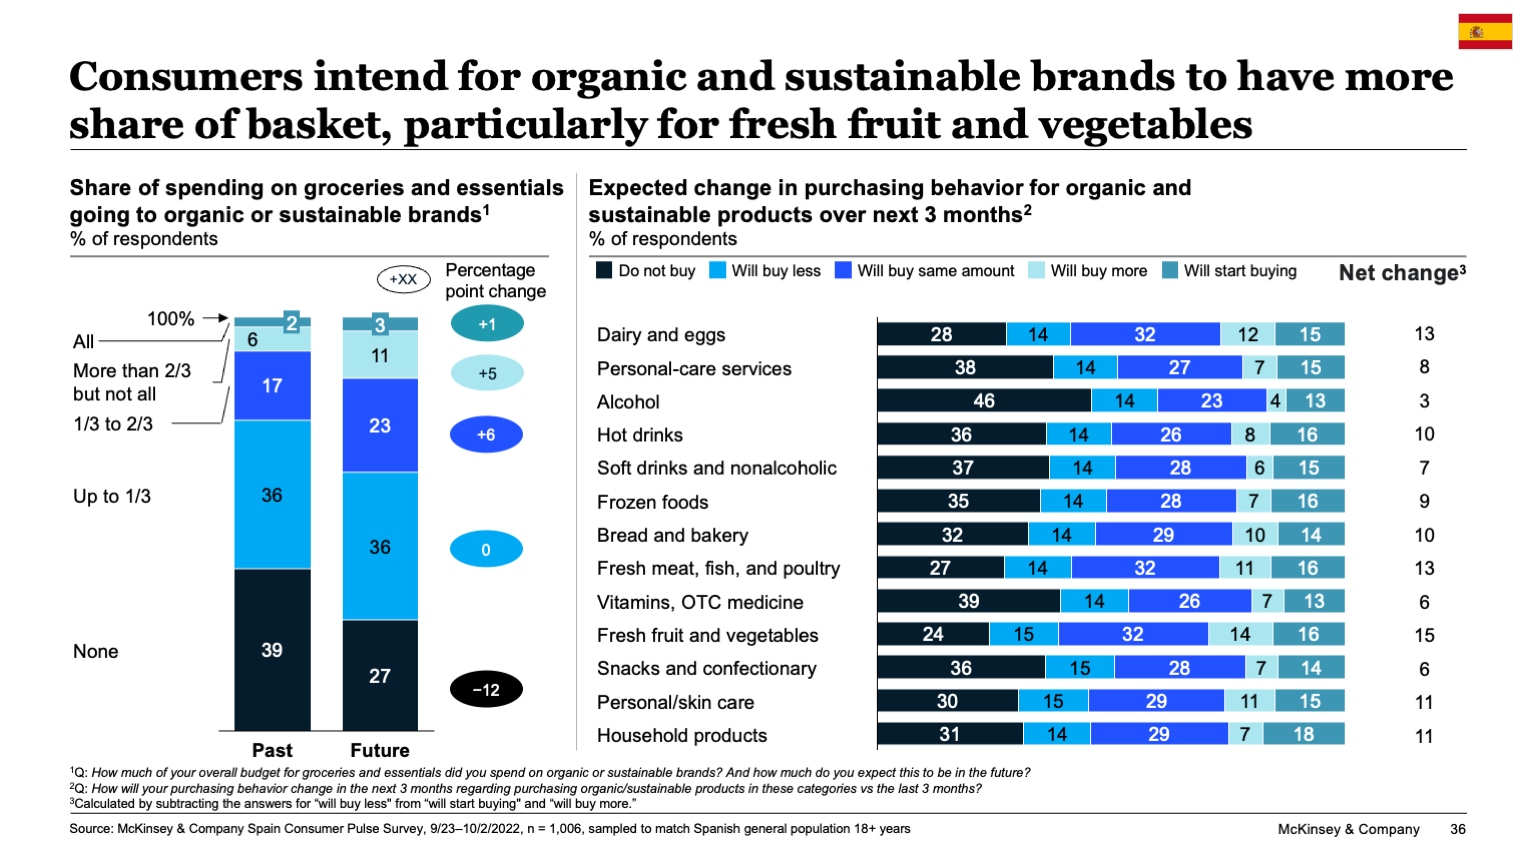 Consumers intend for organic and sustainable brands to have more share of basket, particularly for fresh fruit and vegetables